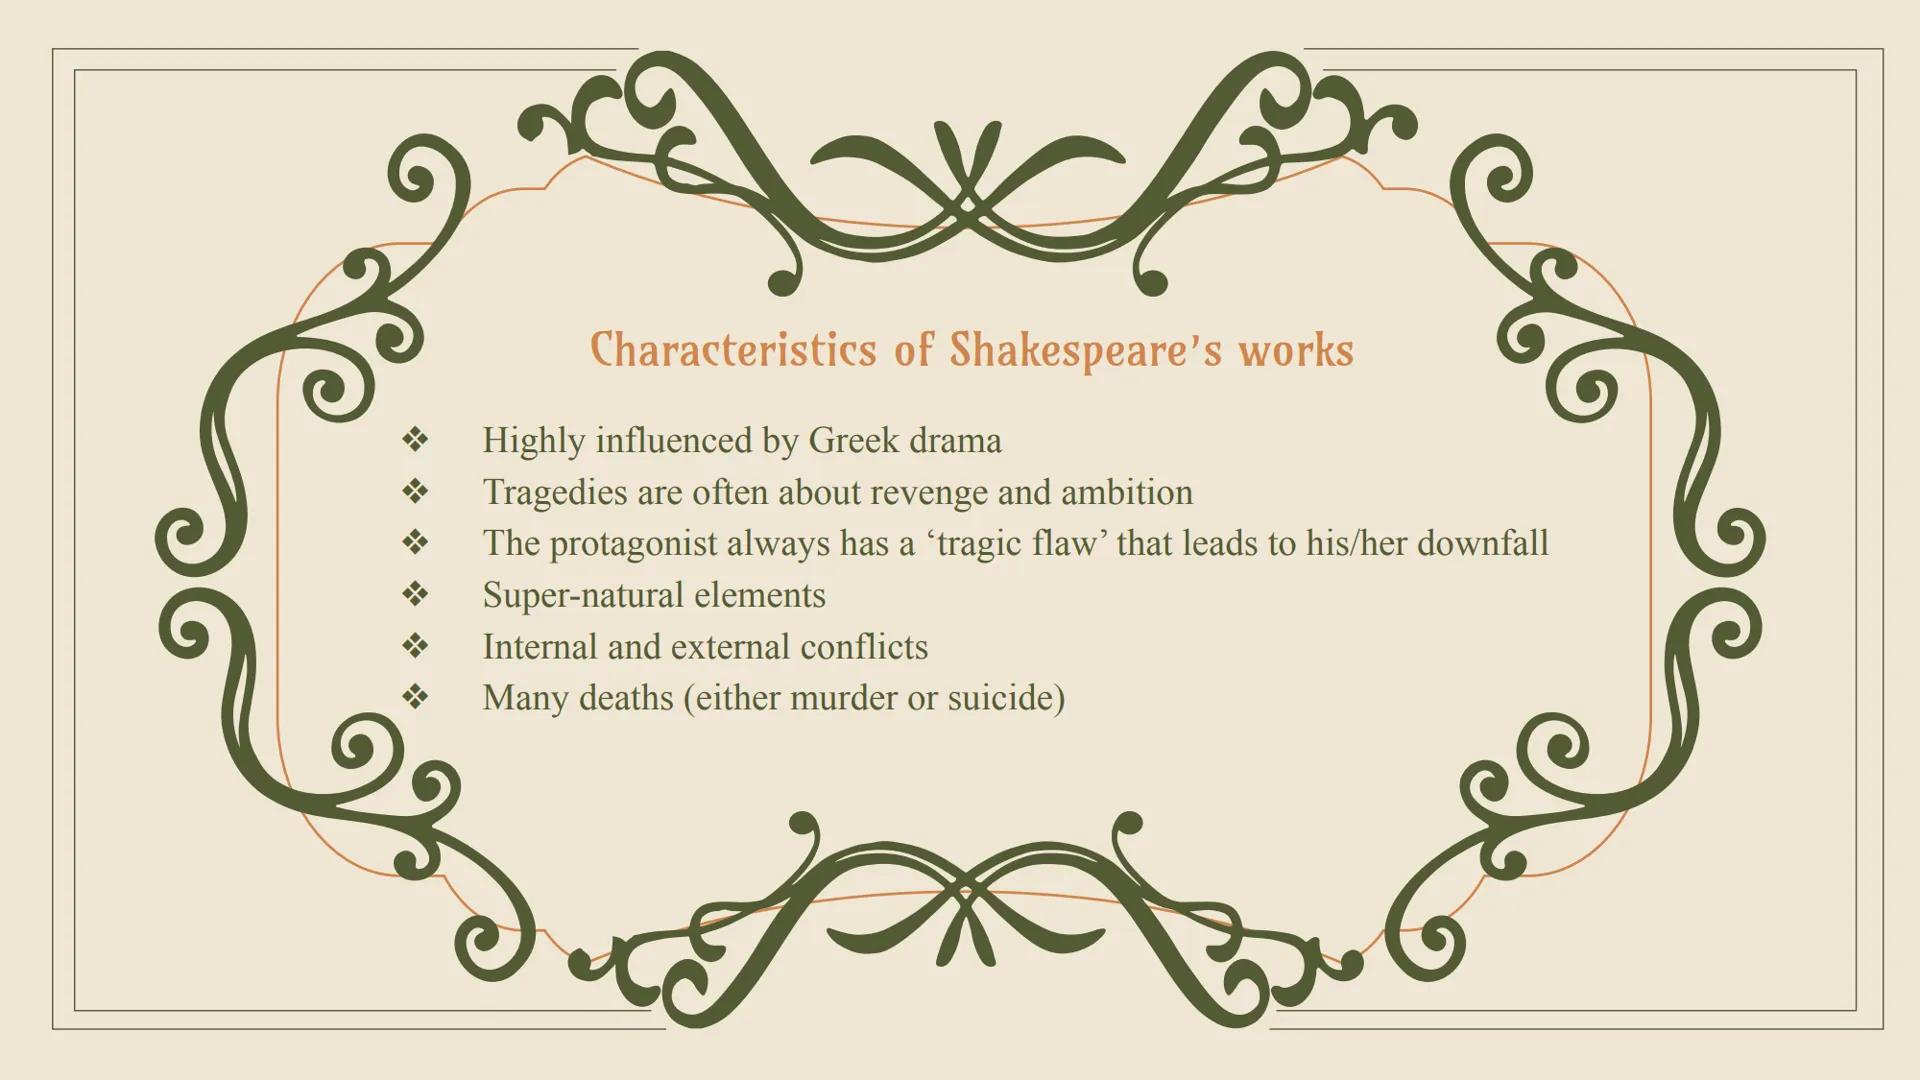 WILLIAM
SHAKESPEARE
1564-1616 TABLE OF CONTENTS
01 Shakespeare's life
02
His works
Sonnets, tragedies, comedies,
history plays and their
cha